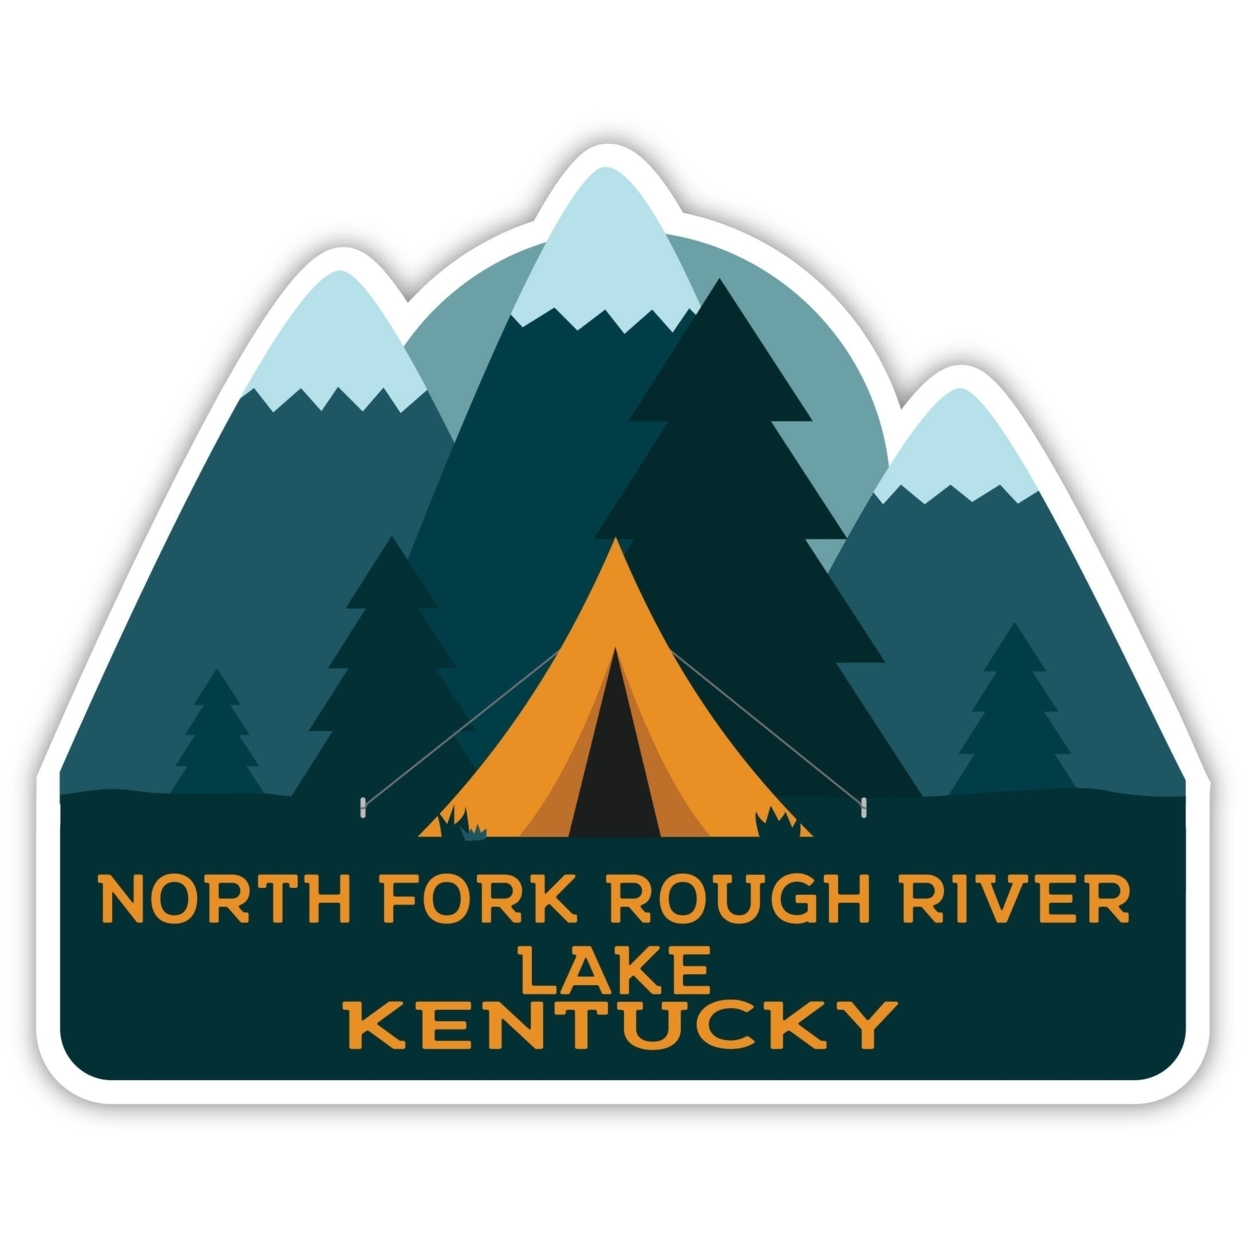 North Fork Rough River Lake Kentucky Souvenir Decorative Stickers (Choose Theme And Size) - Single Unit, 2-Inch, Tent